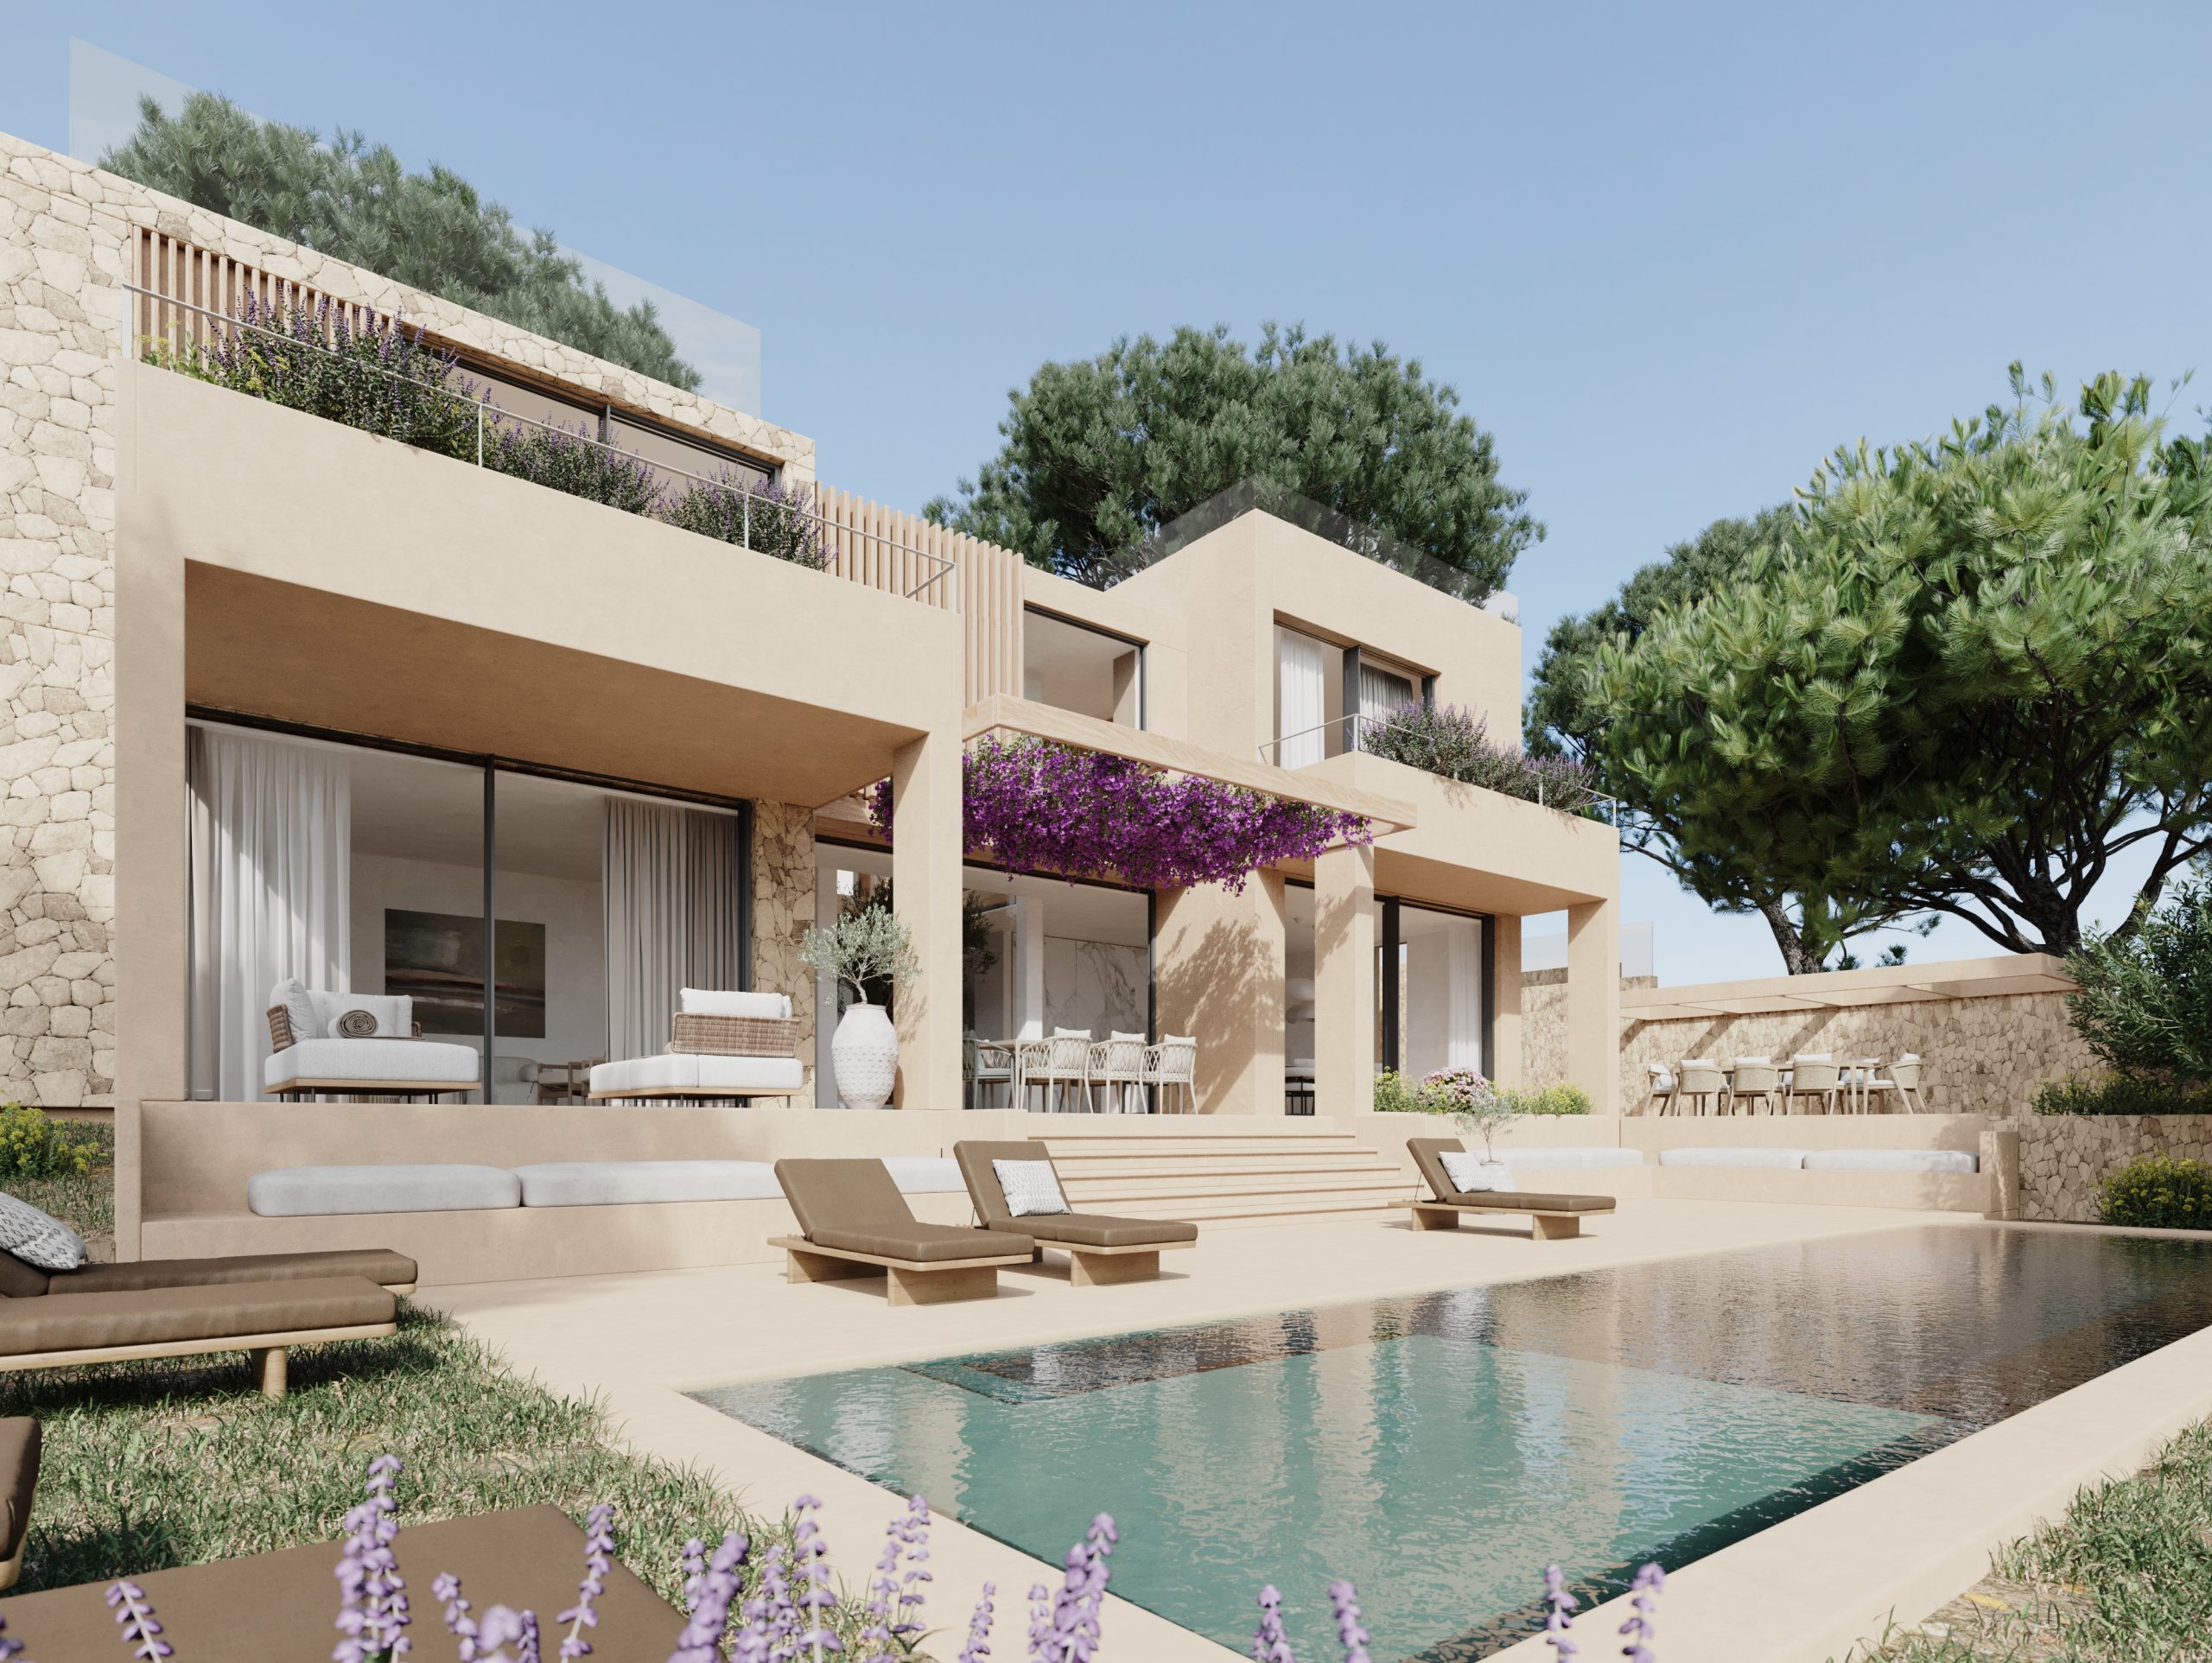 New Villa Project for Sale in Bendinat